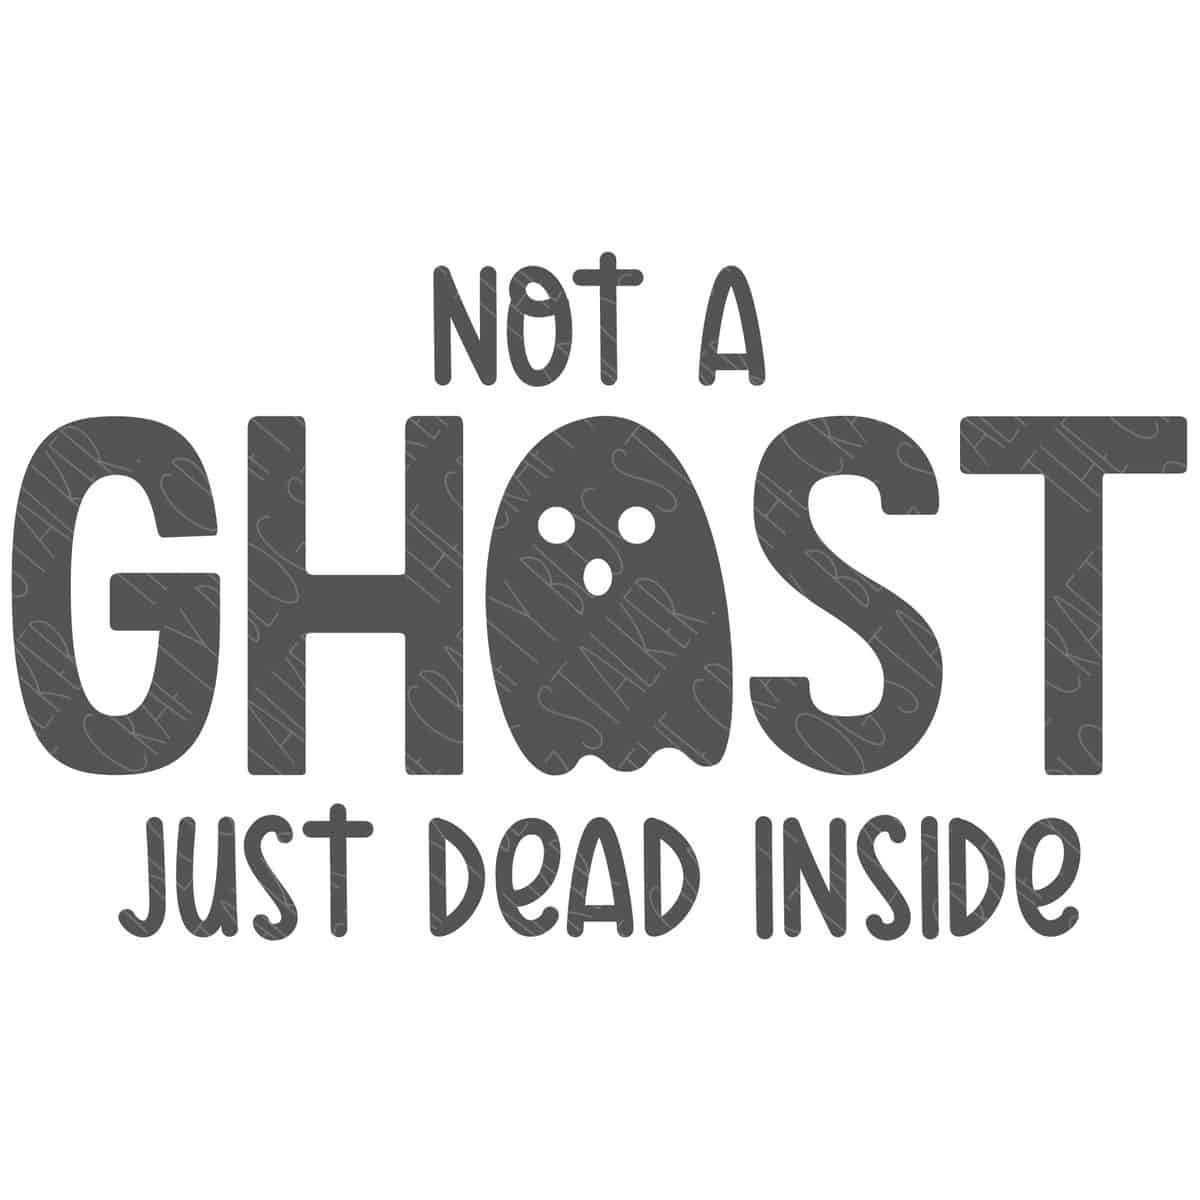 To ghost or not to ghost